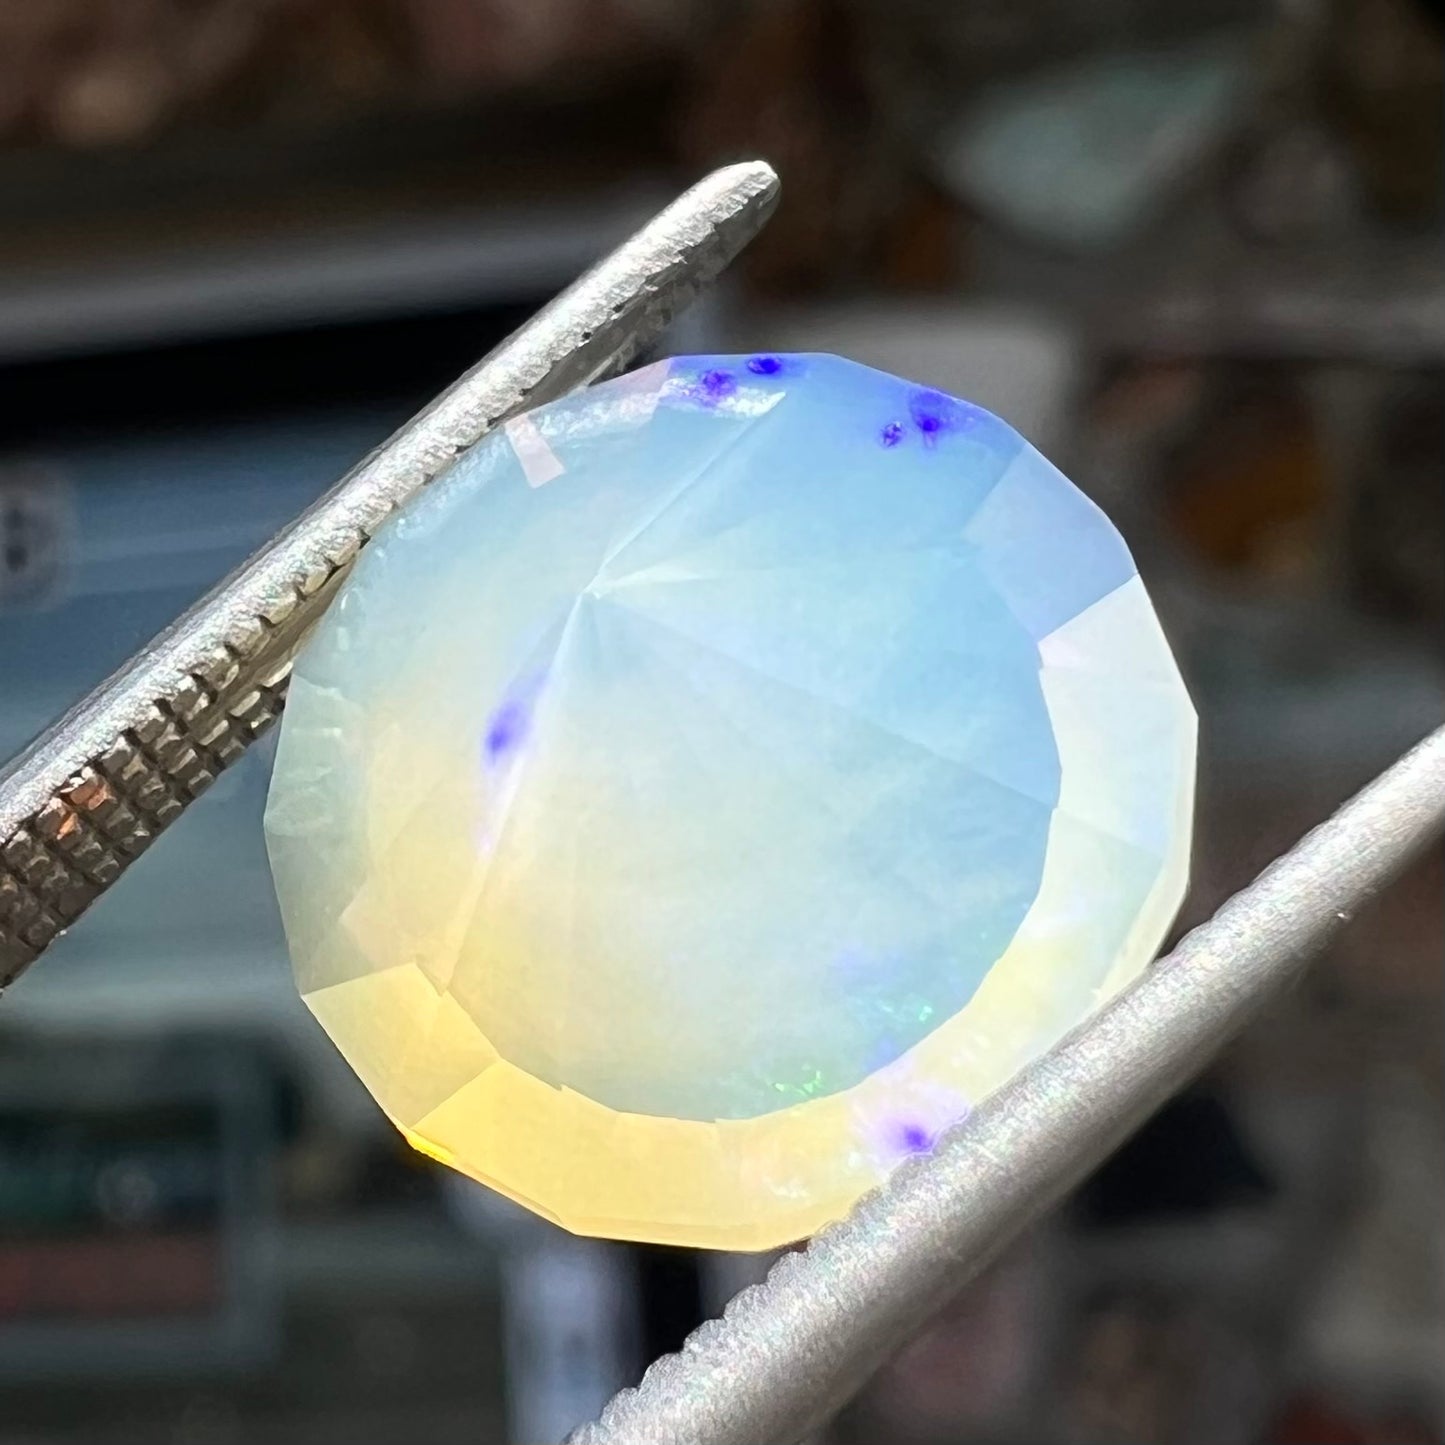 A loose, modified round cut Mexican fire opal gemstone.  The stone is transluscent light yellow with green and blue fire.